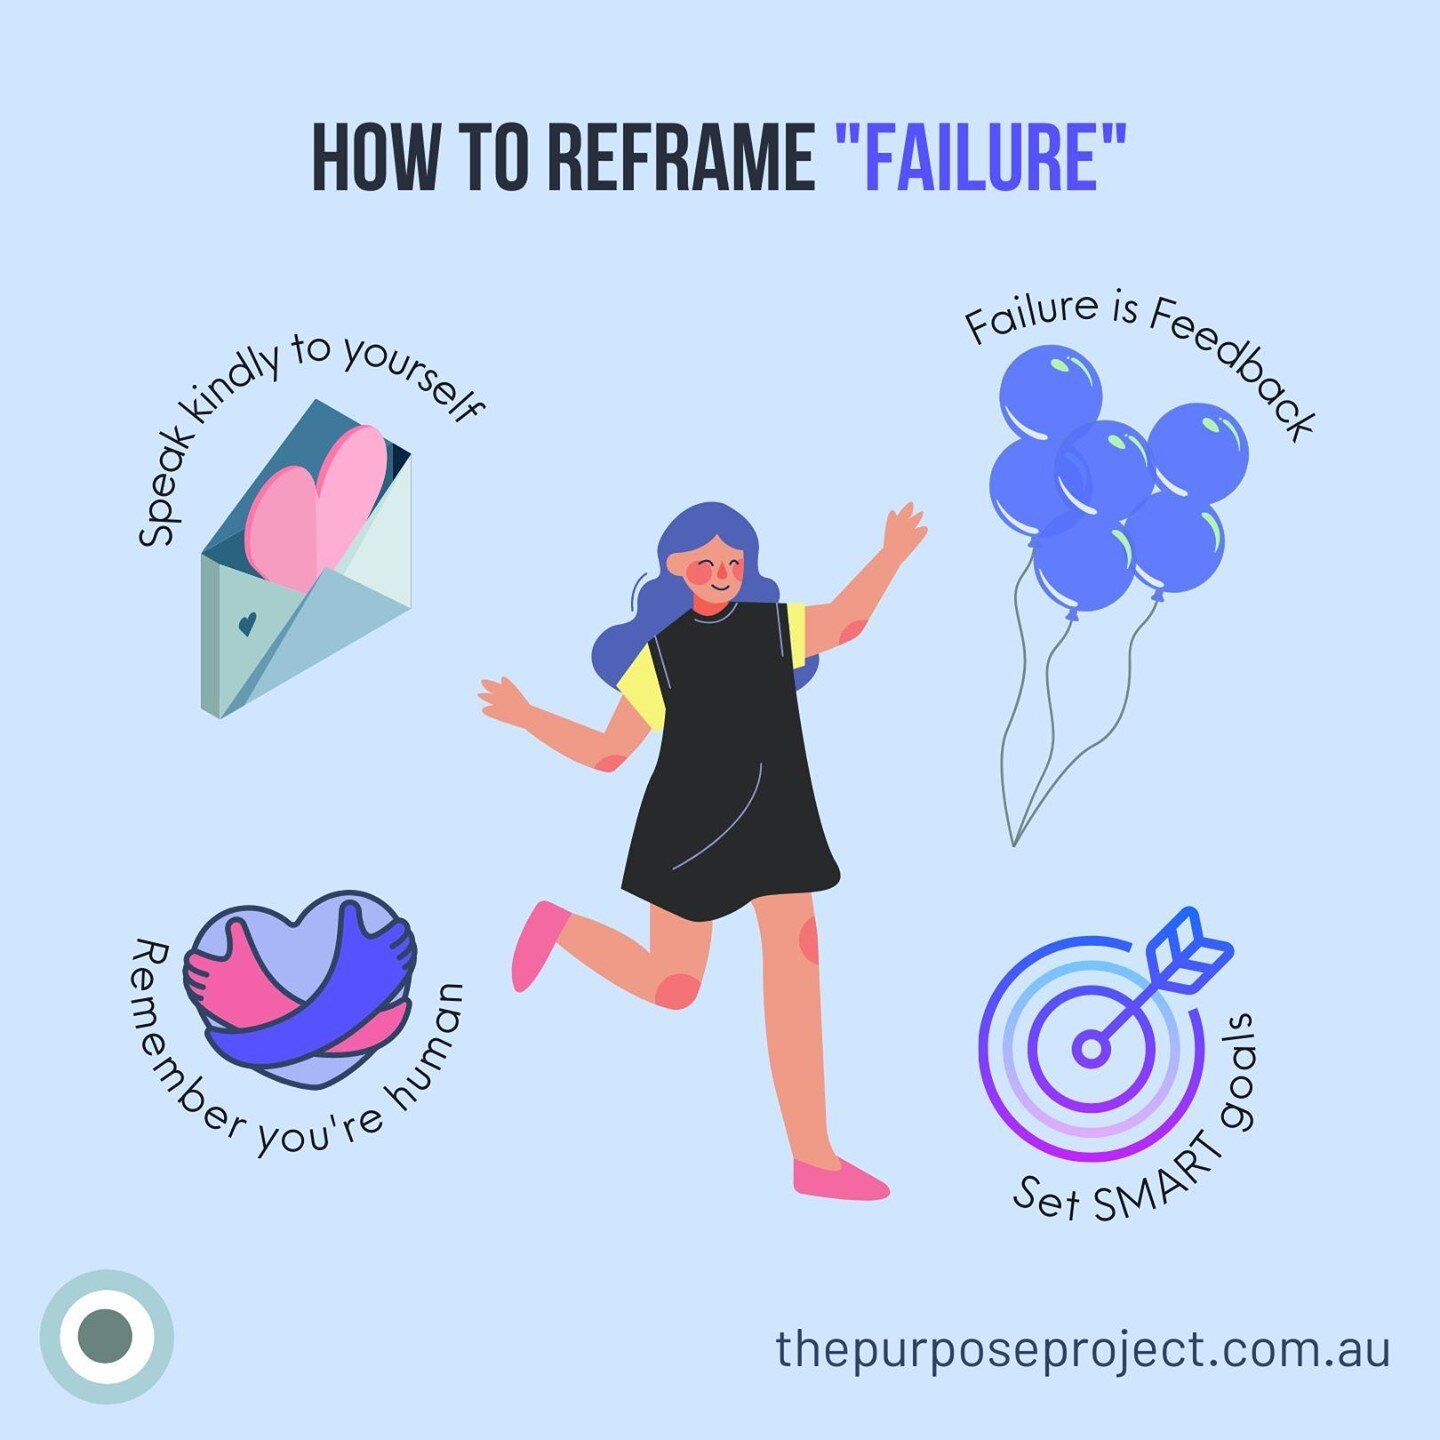 Failure = Feedback.⁠
Just another opportunity for us to learn and grow into who we are meant to be.⁠
⁠
Sometimes all we need to do is reframe failure to see the light at the end of the tunnel. ⁠
⁠
⁠
#mylifedesign #purposeseekers #buildingblocksofsucc